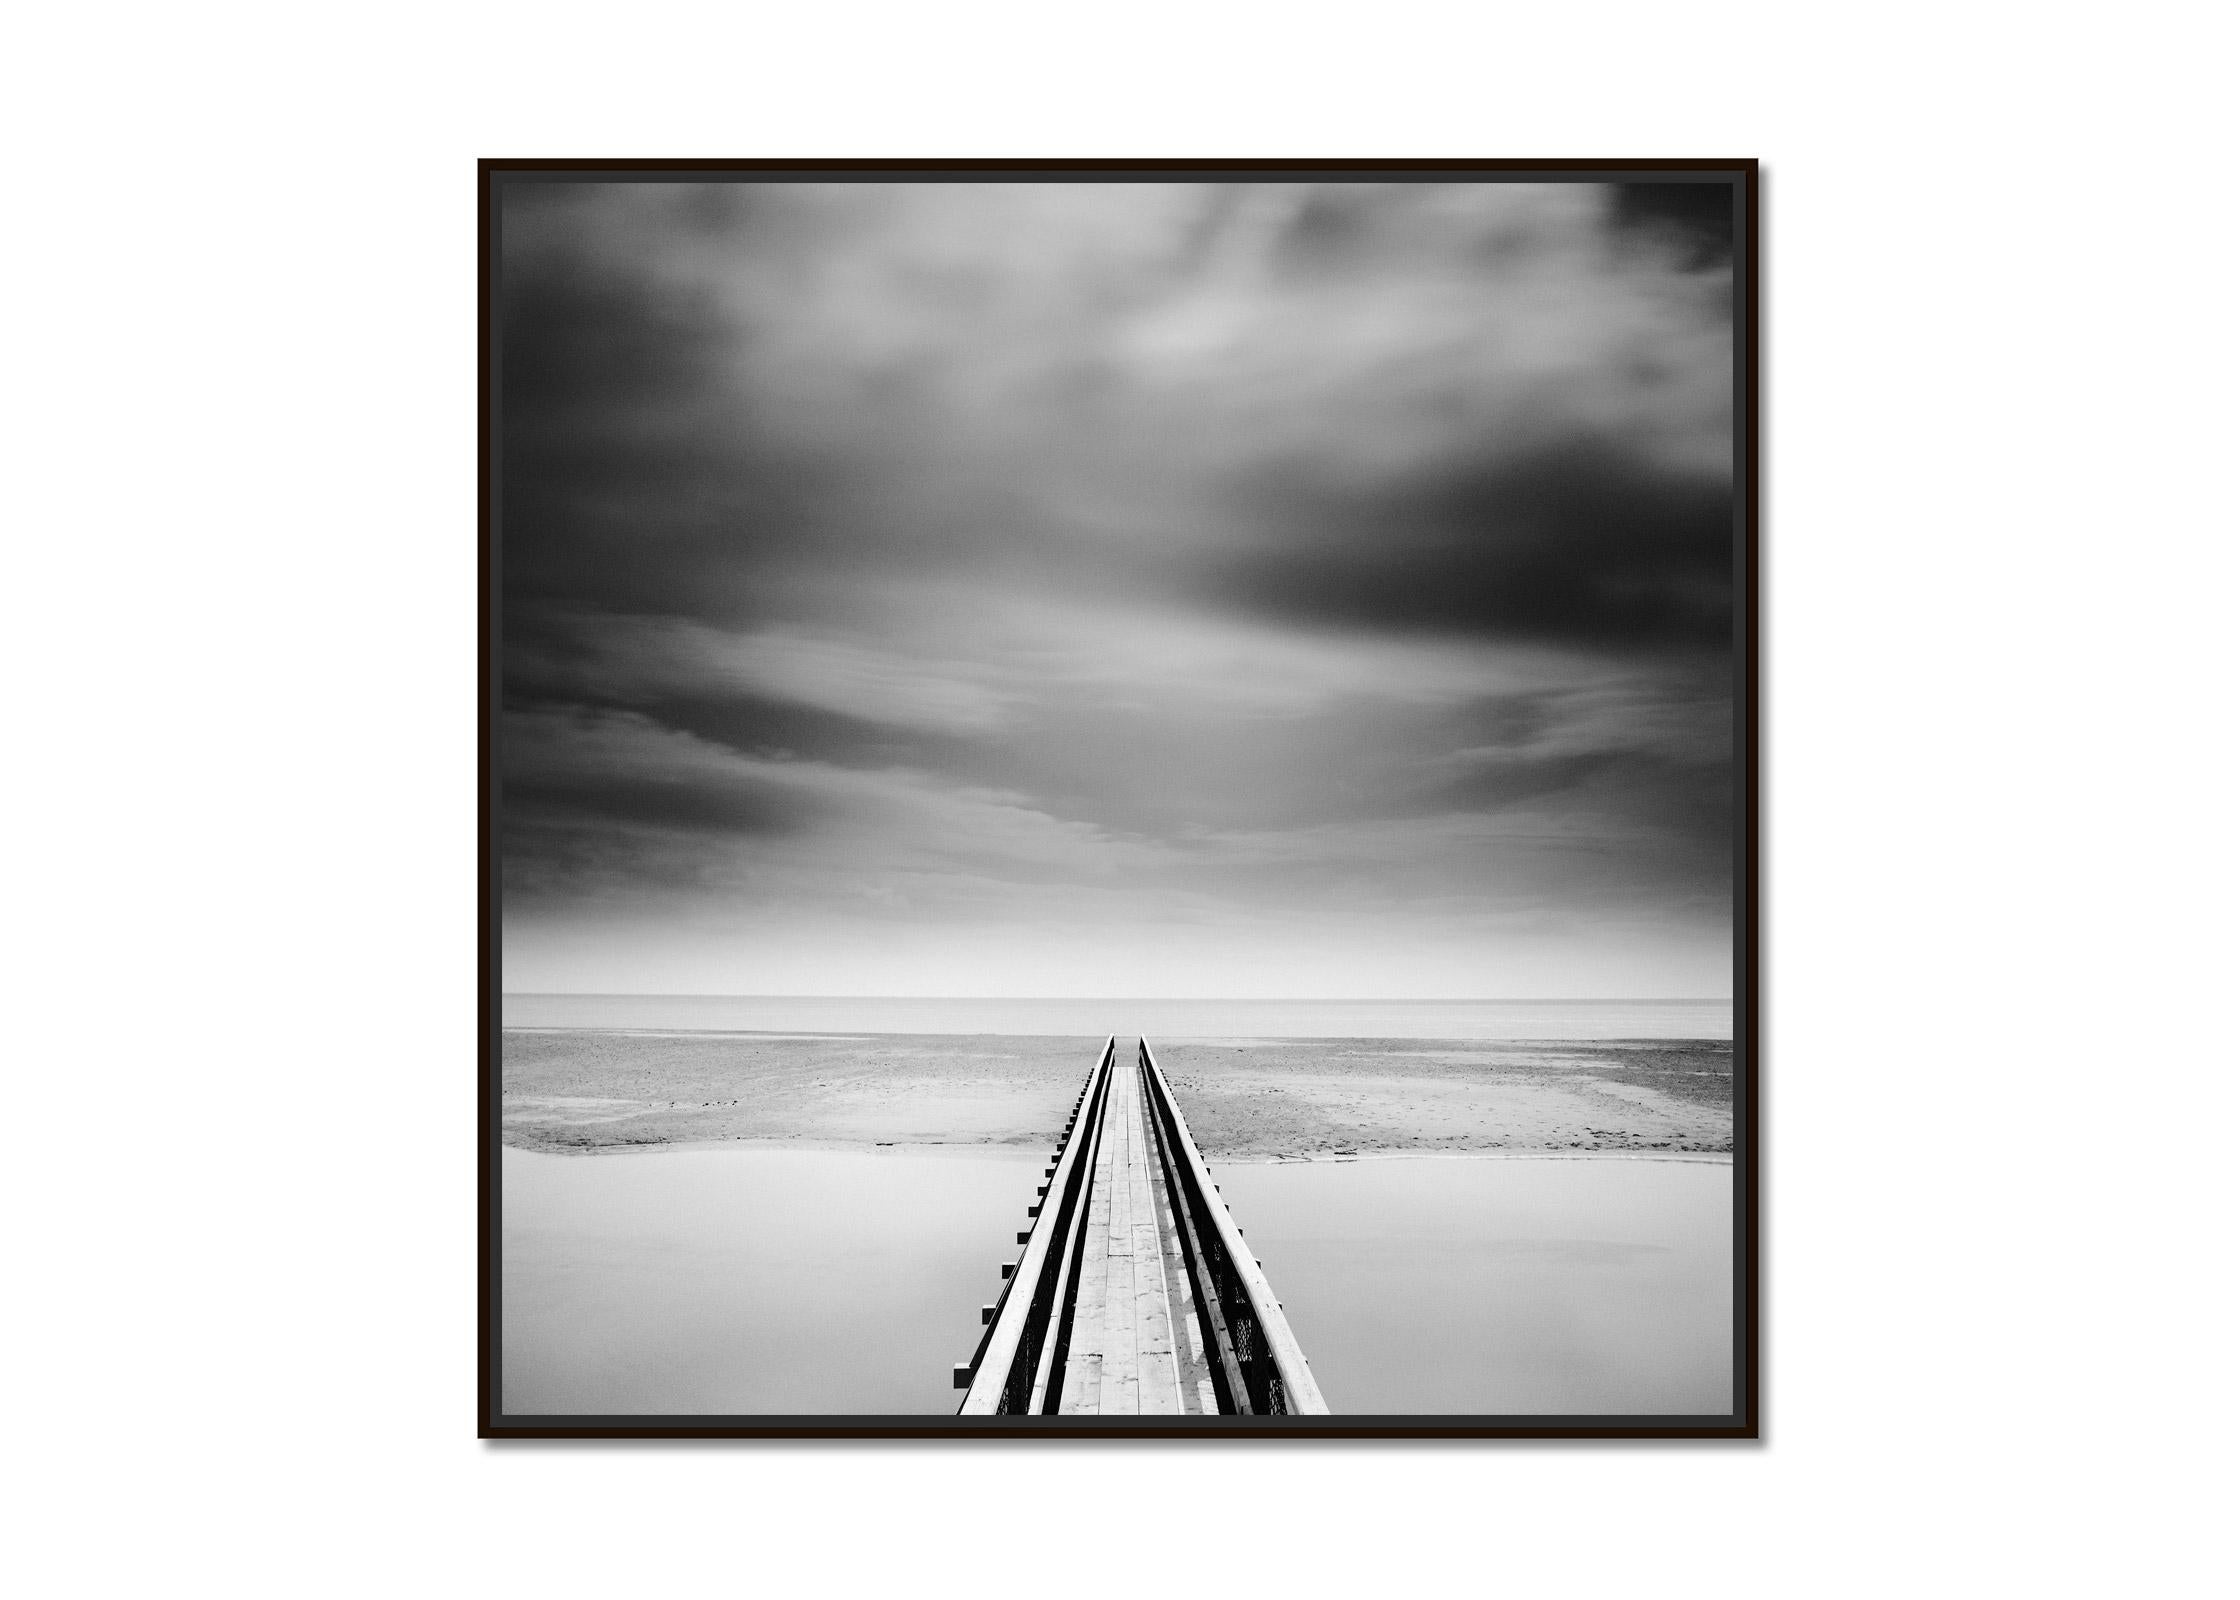 Over the Bridge, Ireland, black and white minimalist fine landscape photography - Photograph by Gerald Berghammer